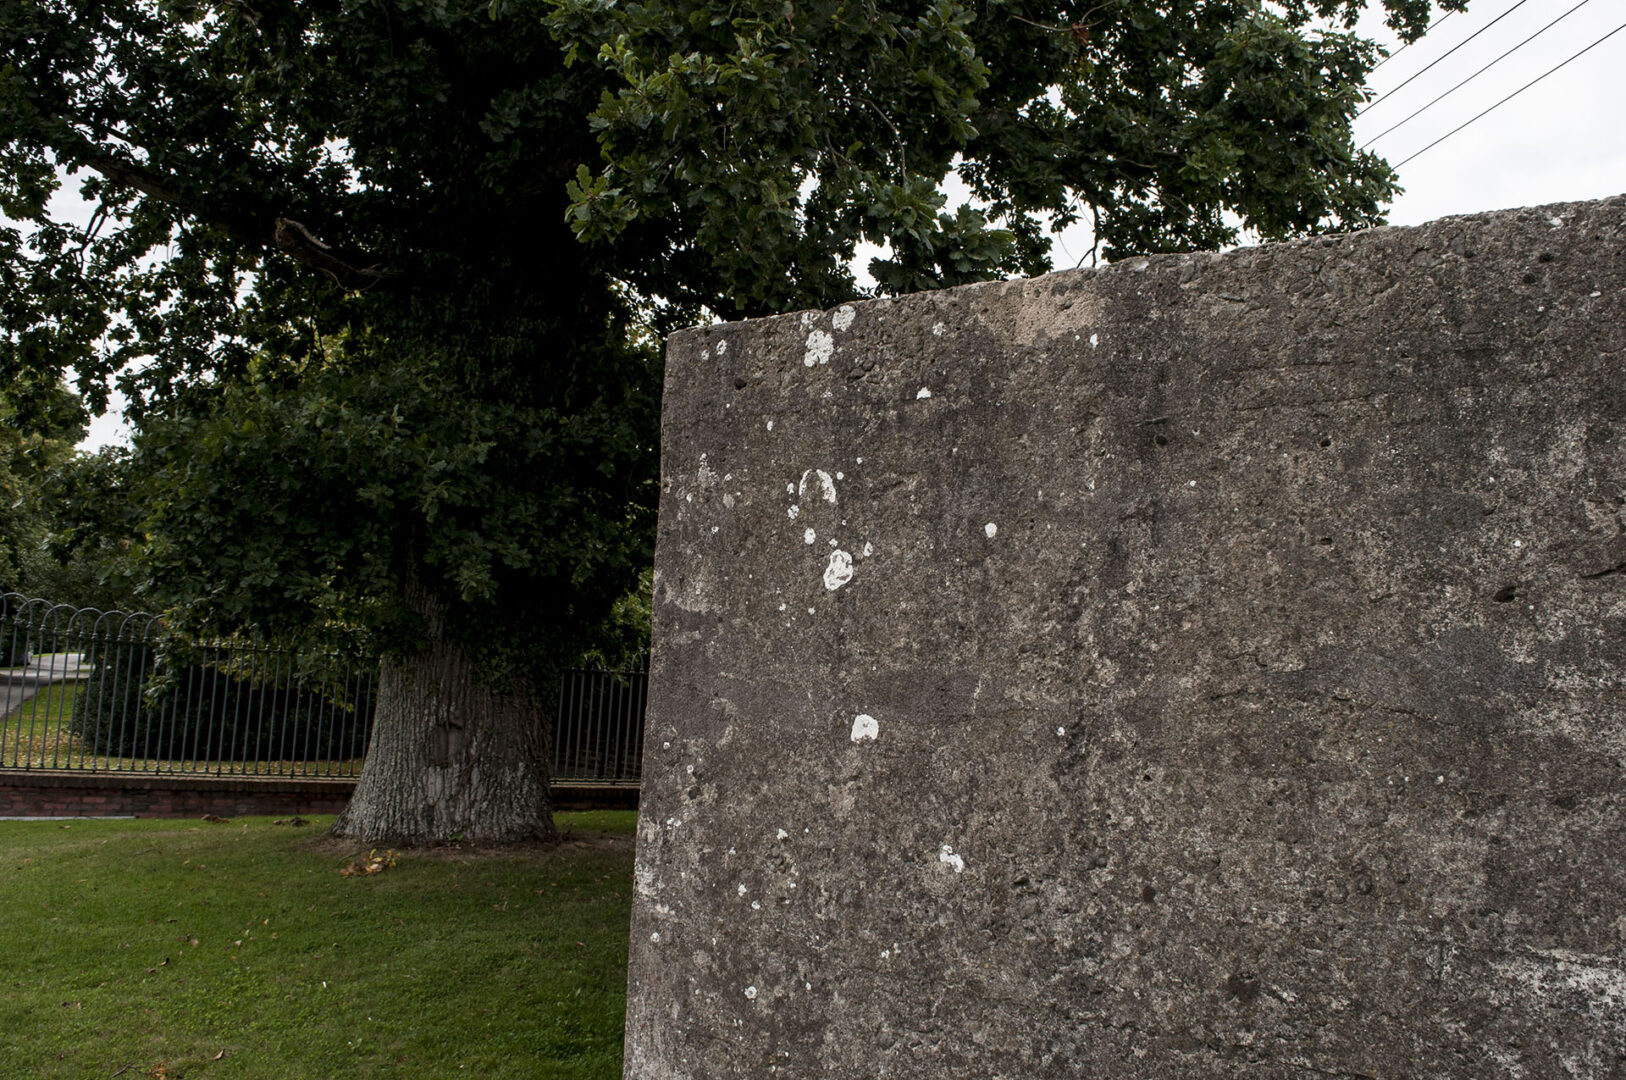 A Second World War era pillbox on the Bann stopline at Scarva House in the village of Scarva, Co. Down.